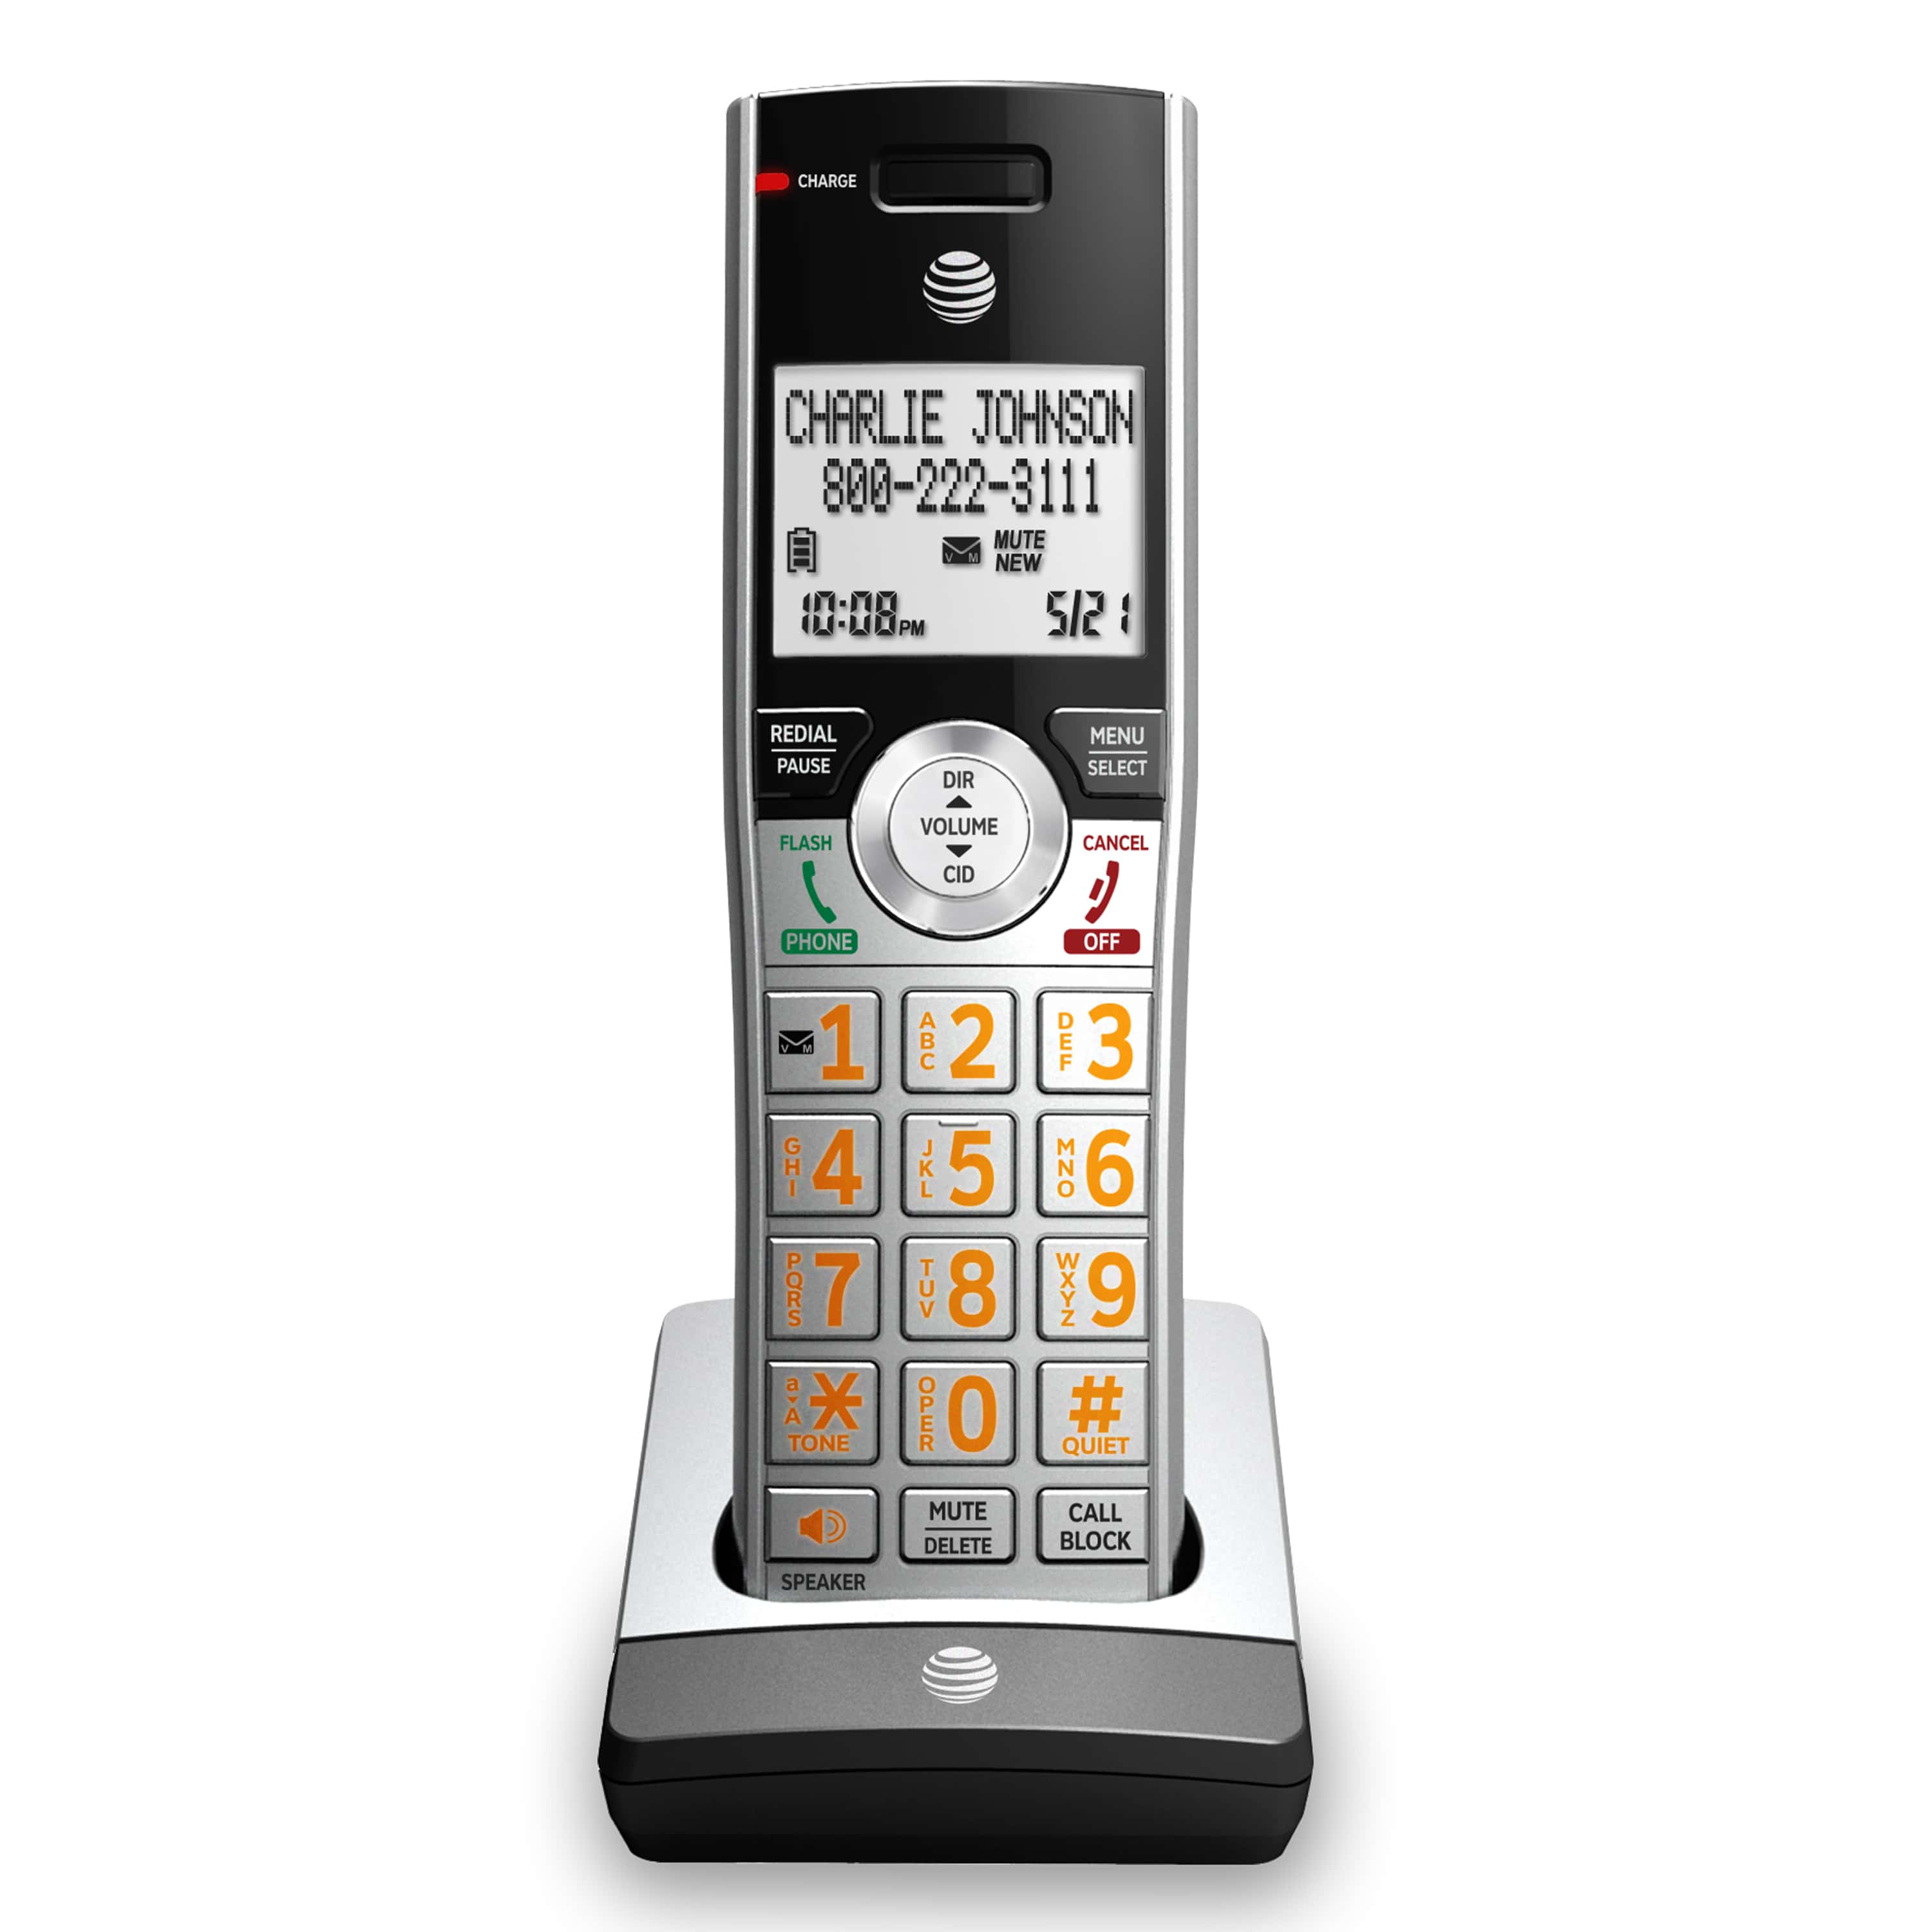 Cordless Accessory Handset for AT&T CL82207, CL82267, CL82307, CL82367, CL82407, CL83207, CL83407, CL84107, CL84207 and CL84327 - view 1